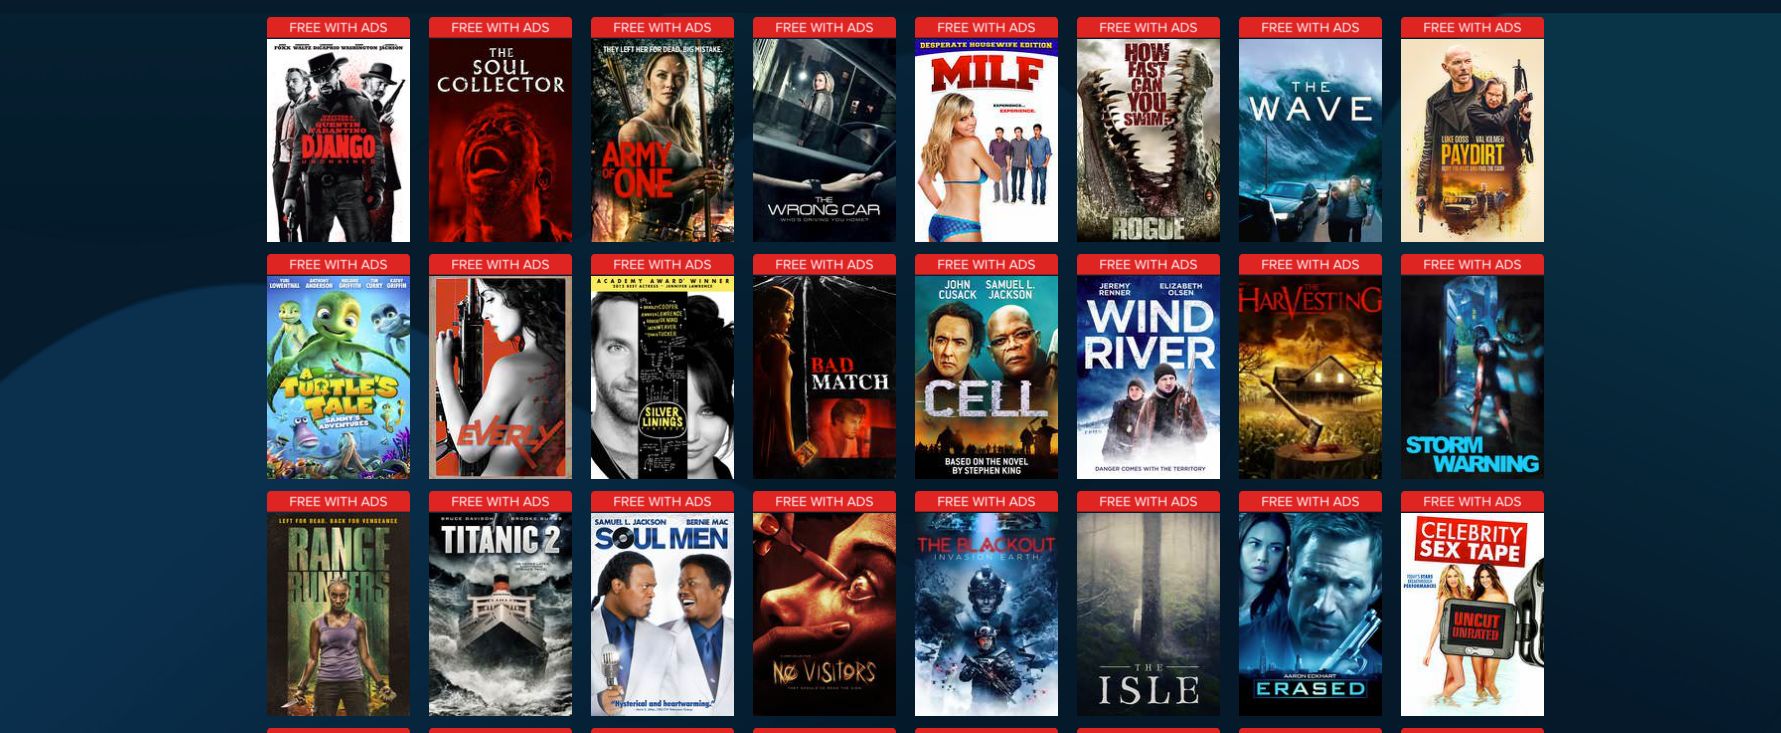 Free Vudu Movies Here Are The Best Ones To Check Out - Android Authority